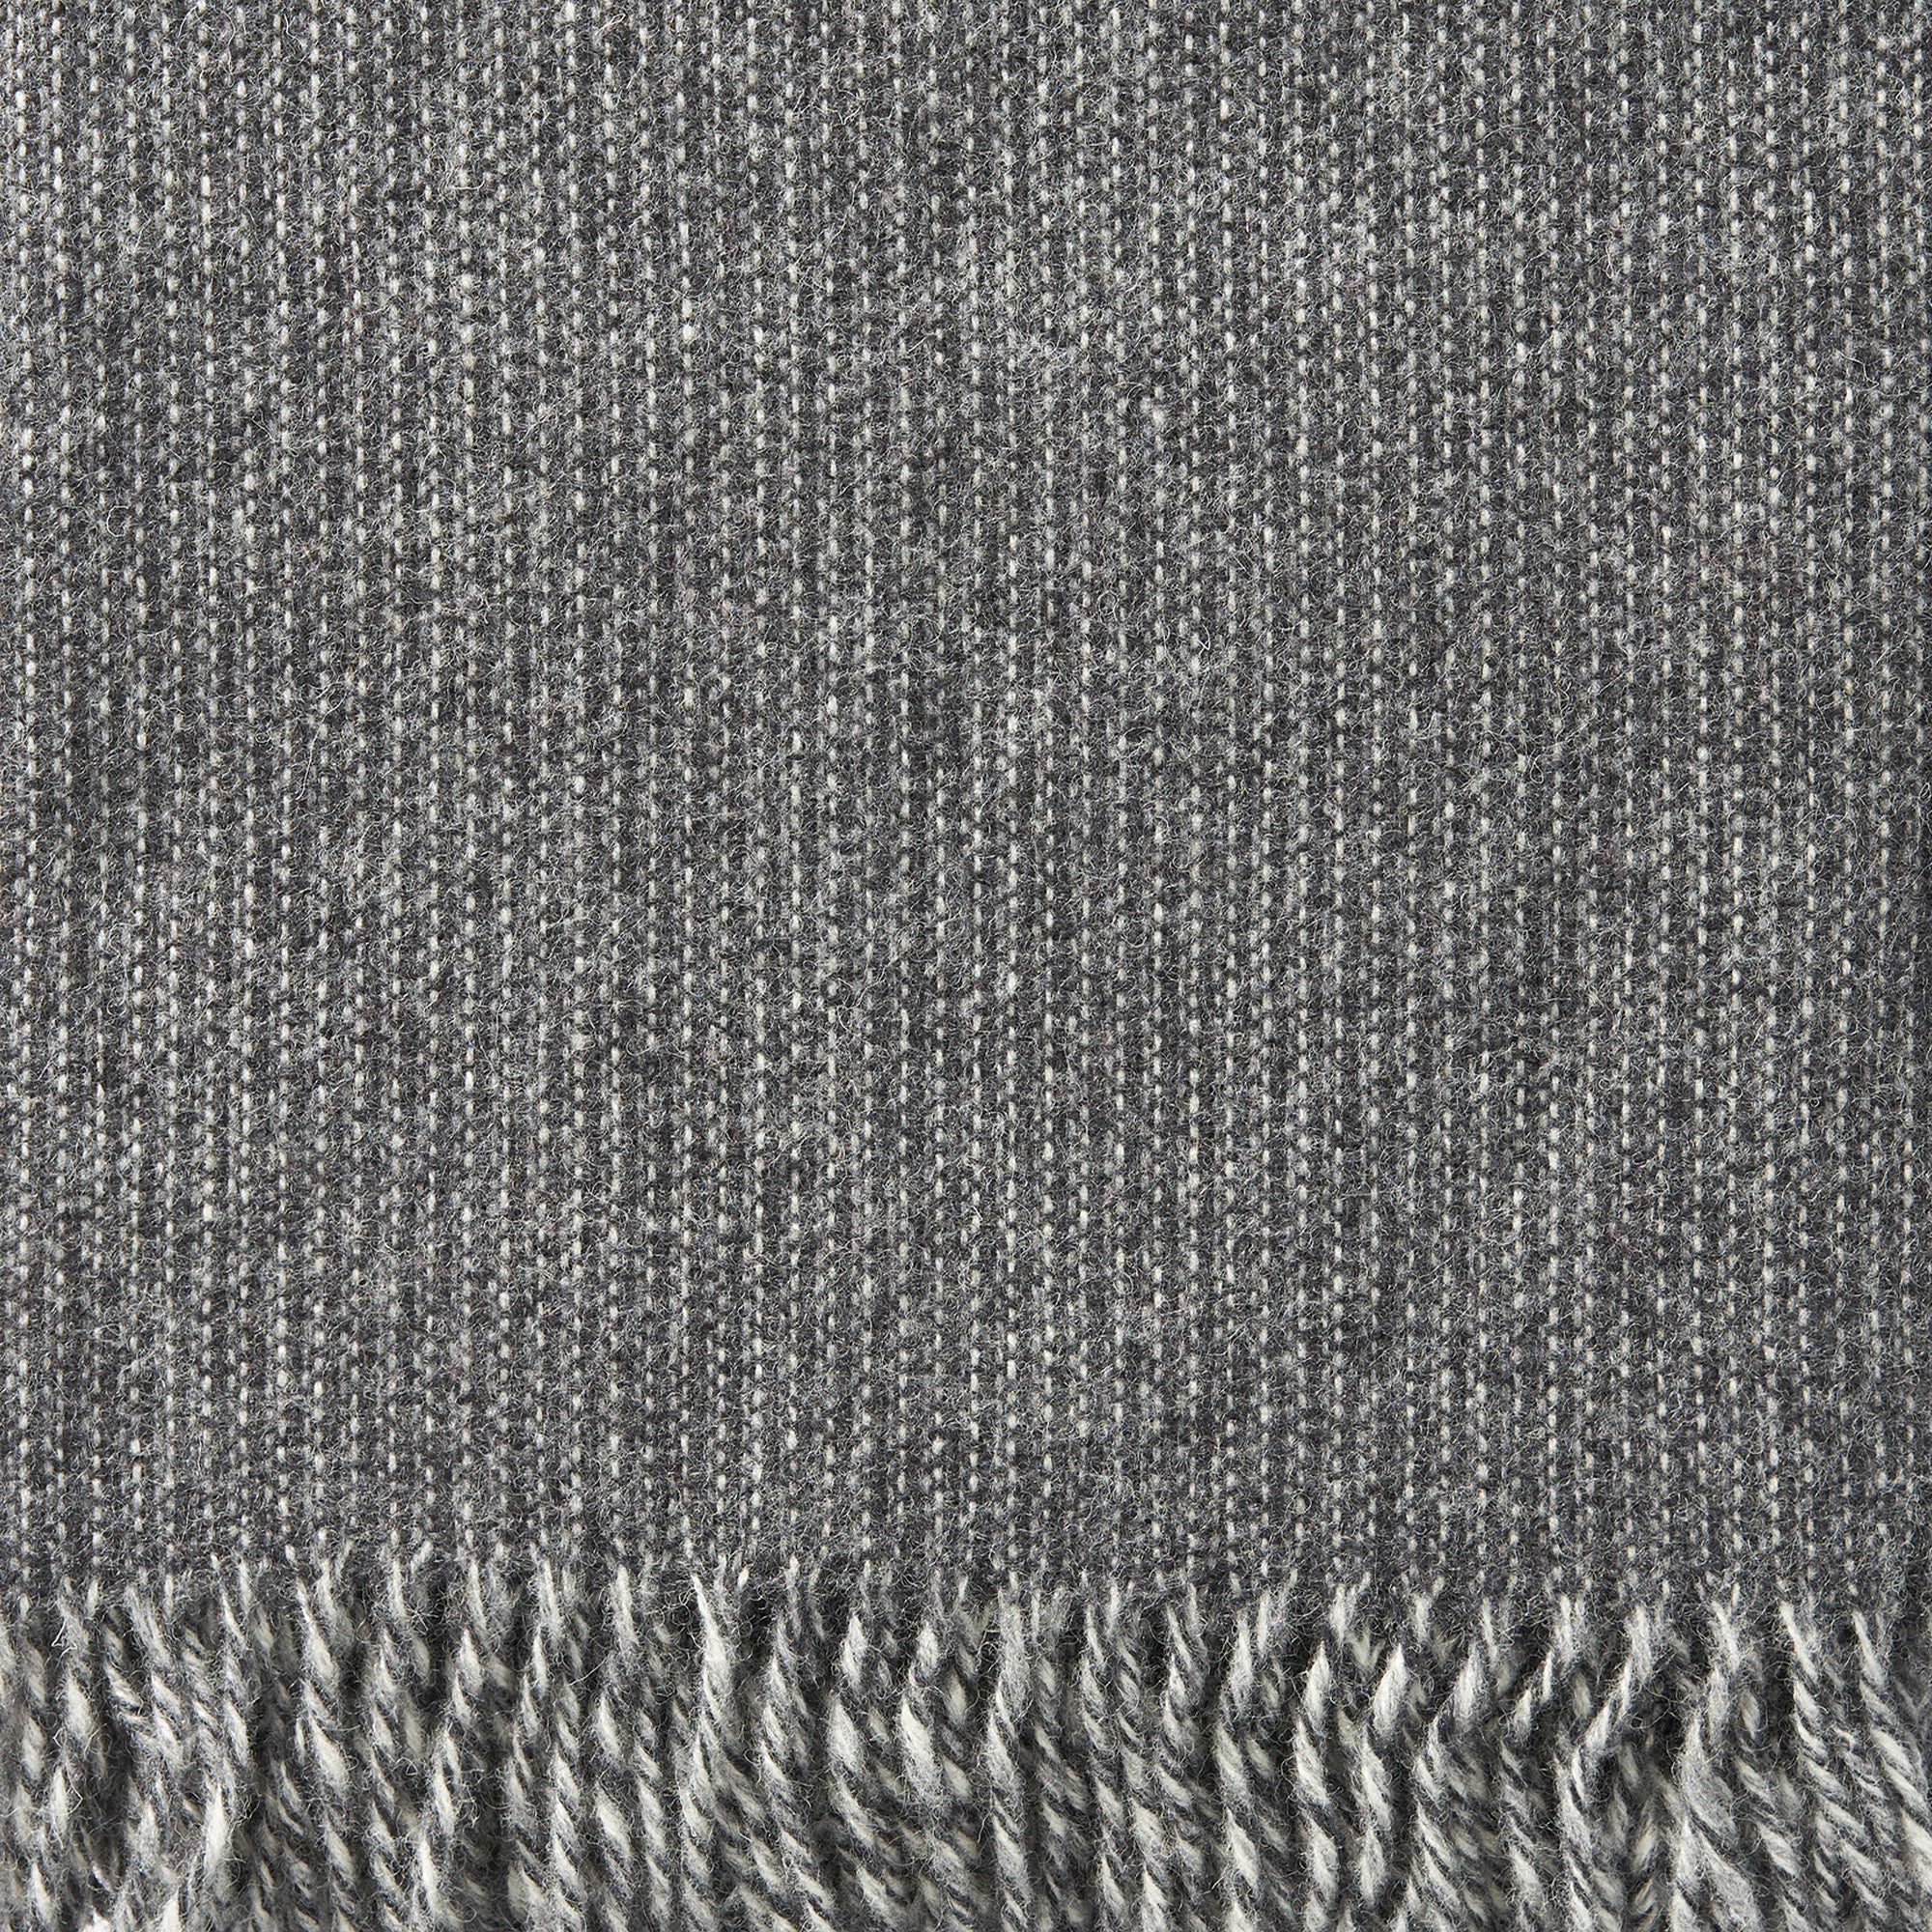 Shimmer Grey 130x200cm Brushed Lambswool Throw